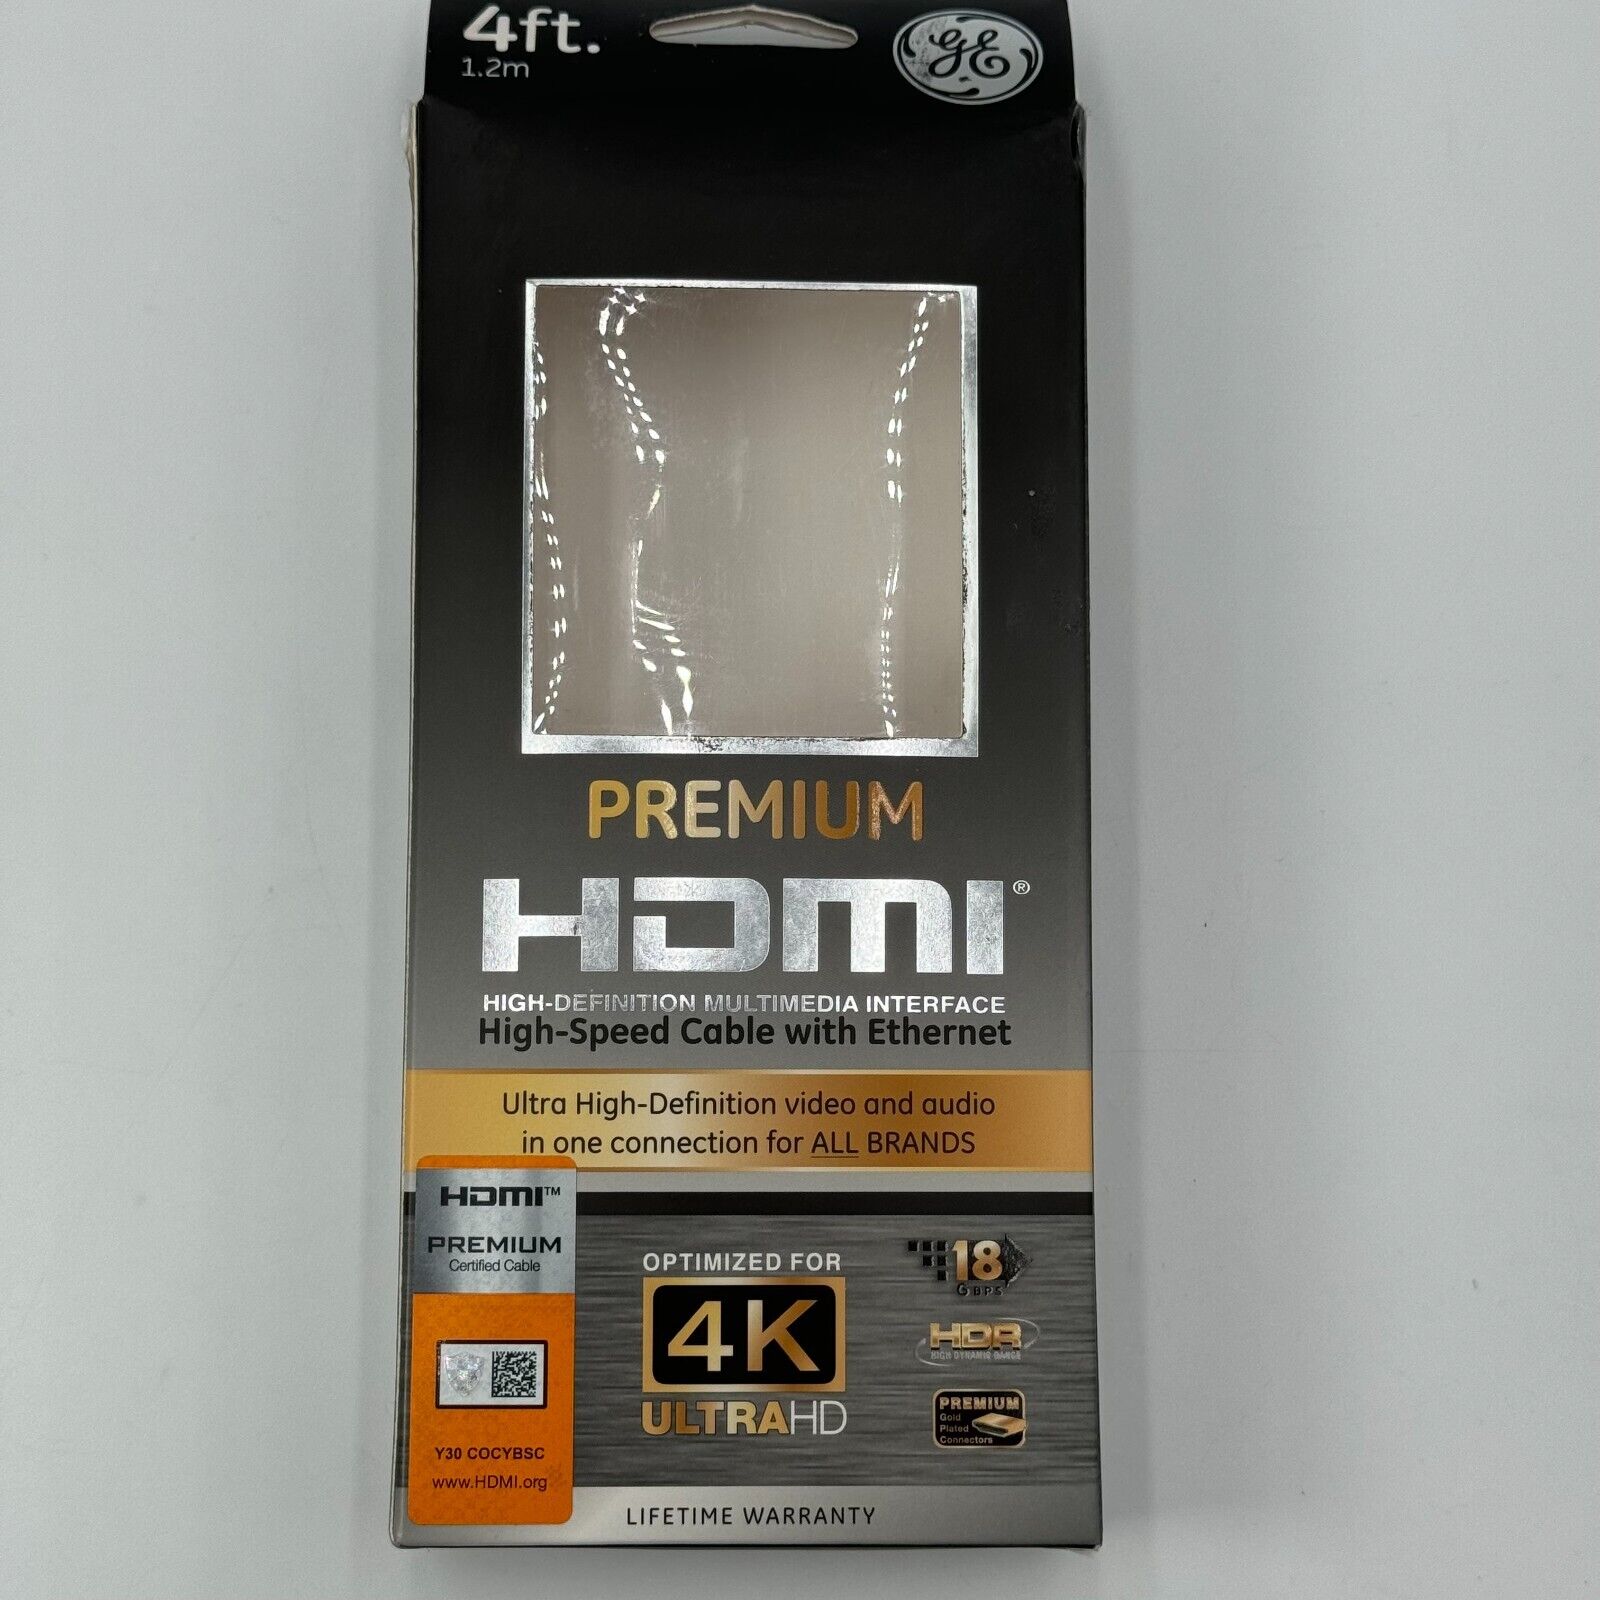 GE 4' Premium HDMI High-Speed Cable with Ethernet 4K Ultra HD 18GBPS Gold Plate